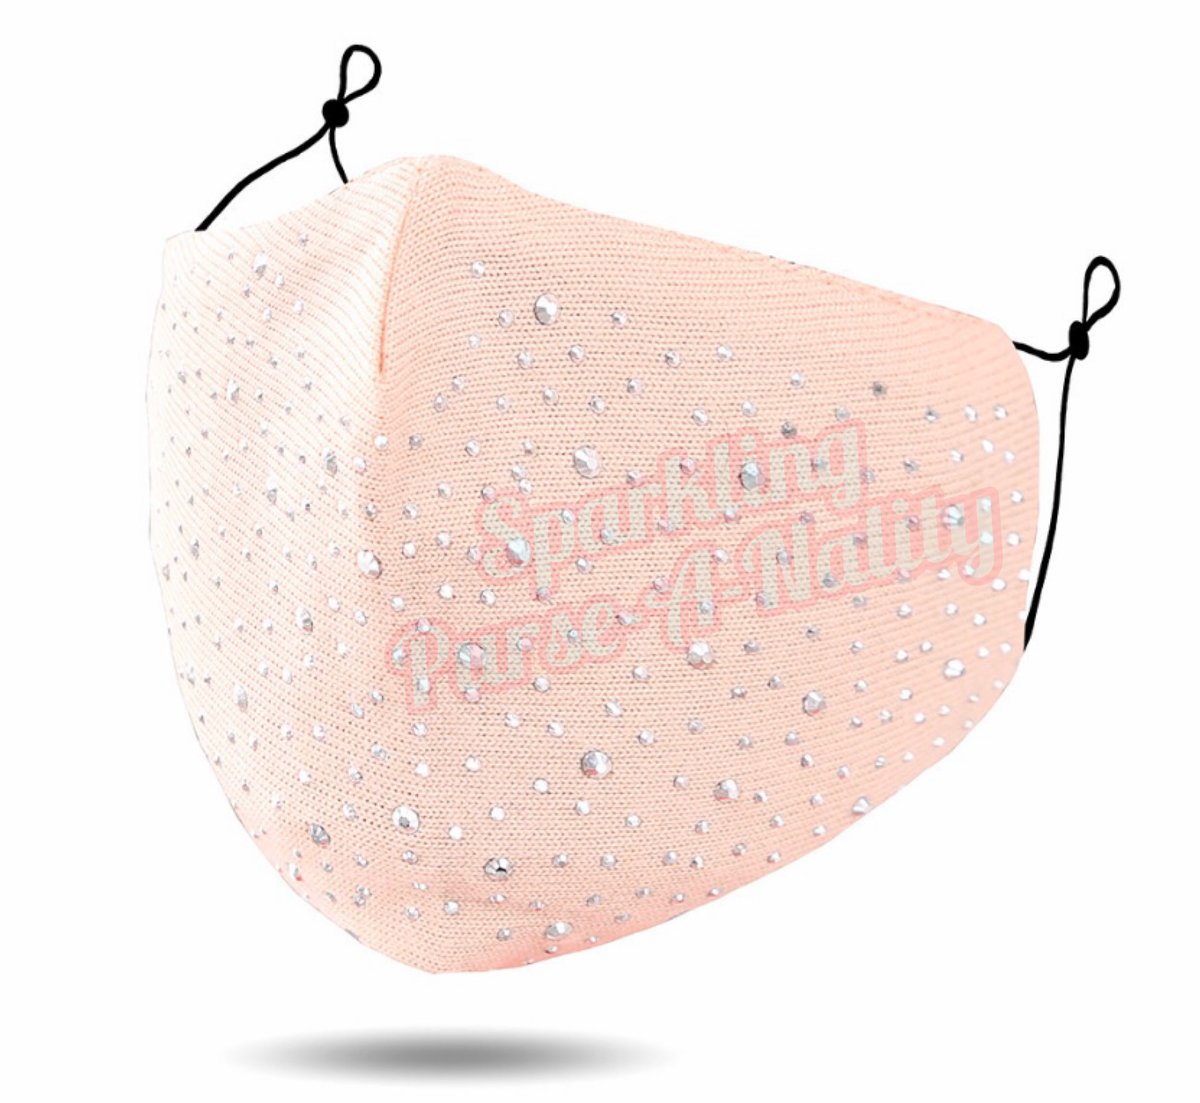 Image of “Sparkling” Hey Girl Face Mask